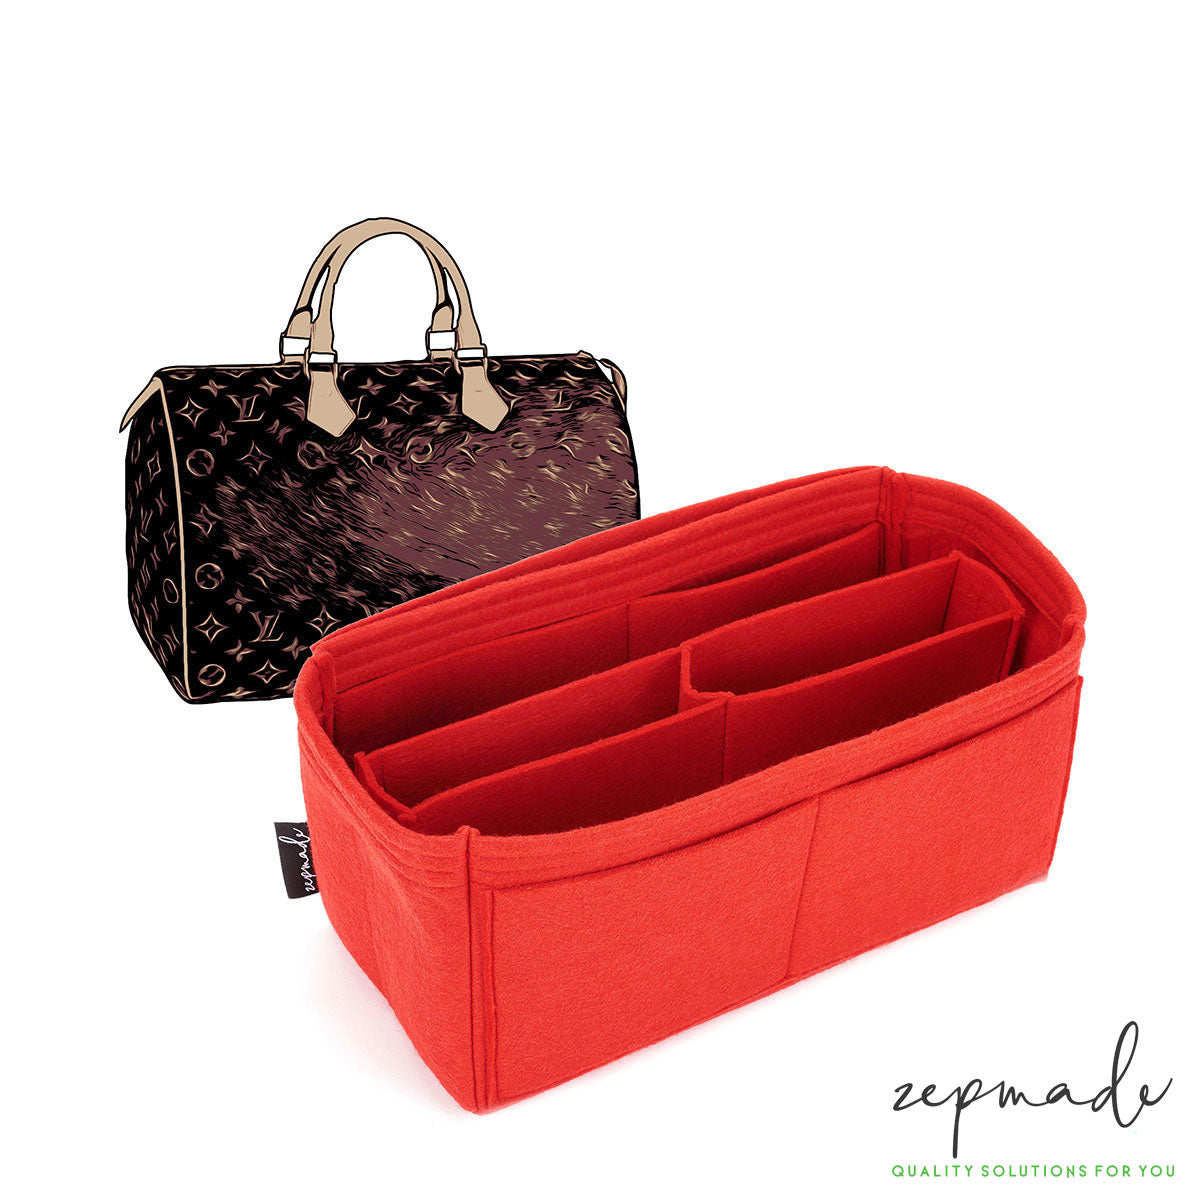 Louis Vuitton Speedy Organizer Insert, Bag Organizer with Middle  Compartment and Exterior Pockets